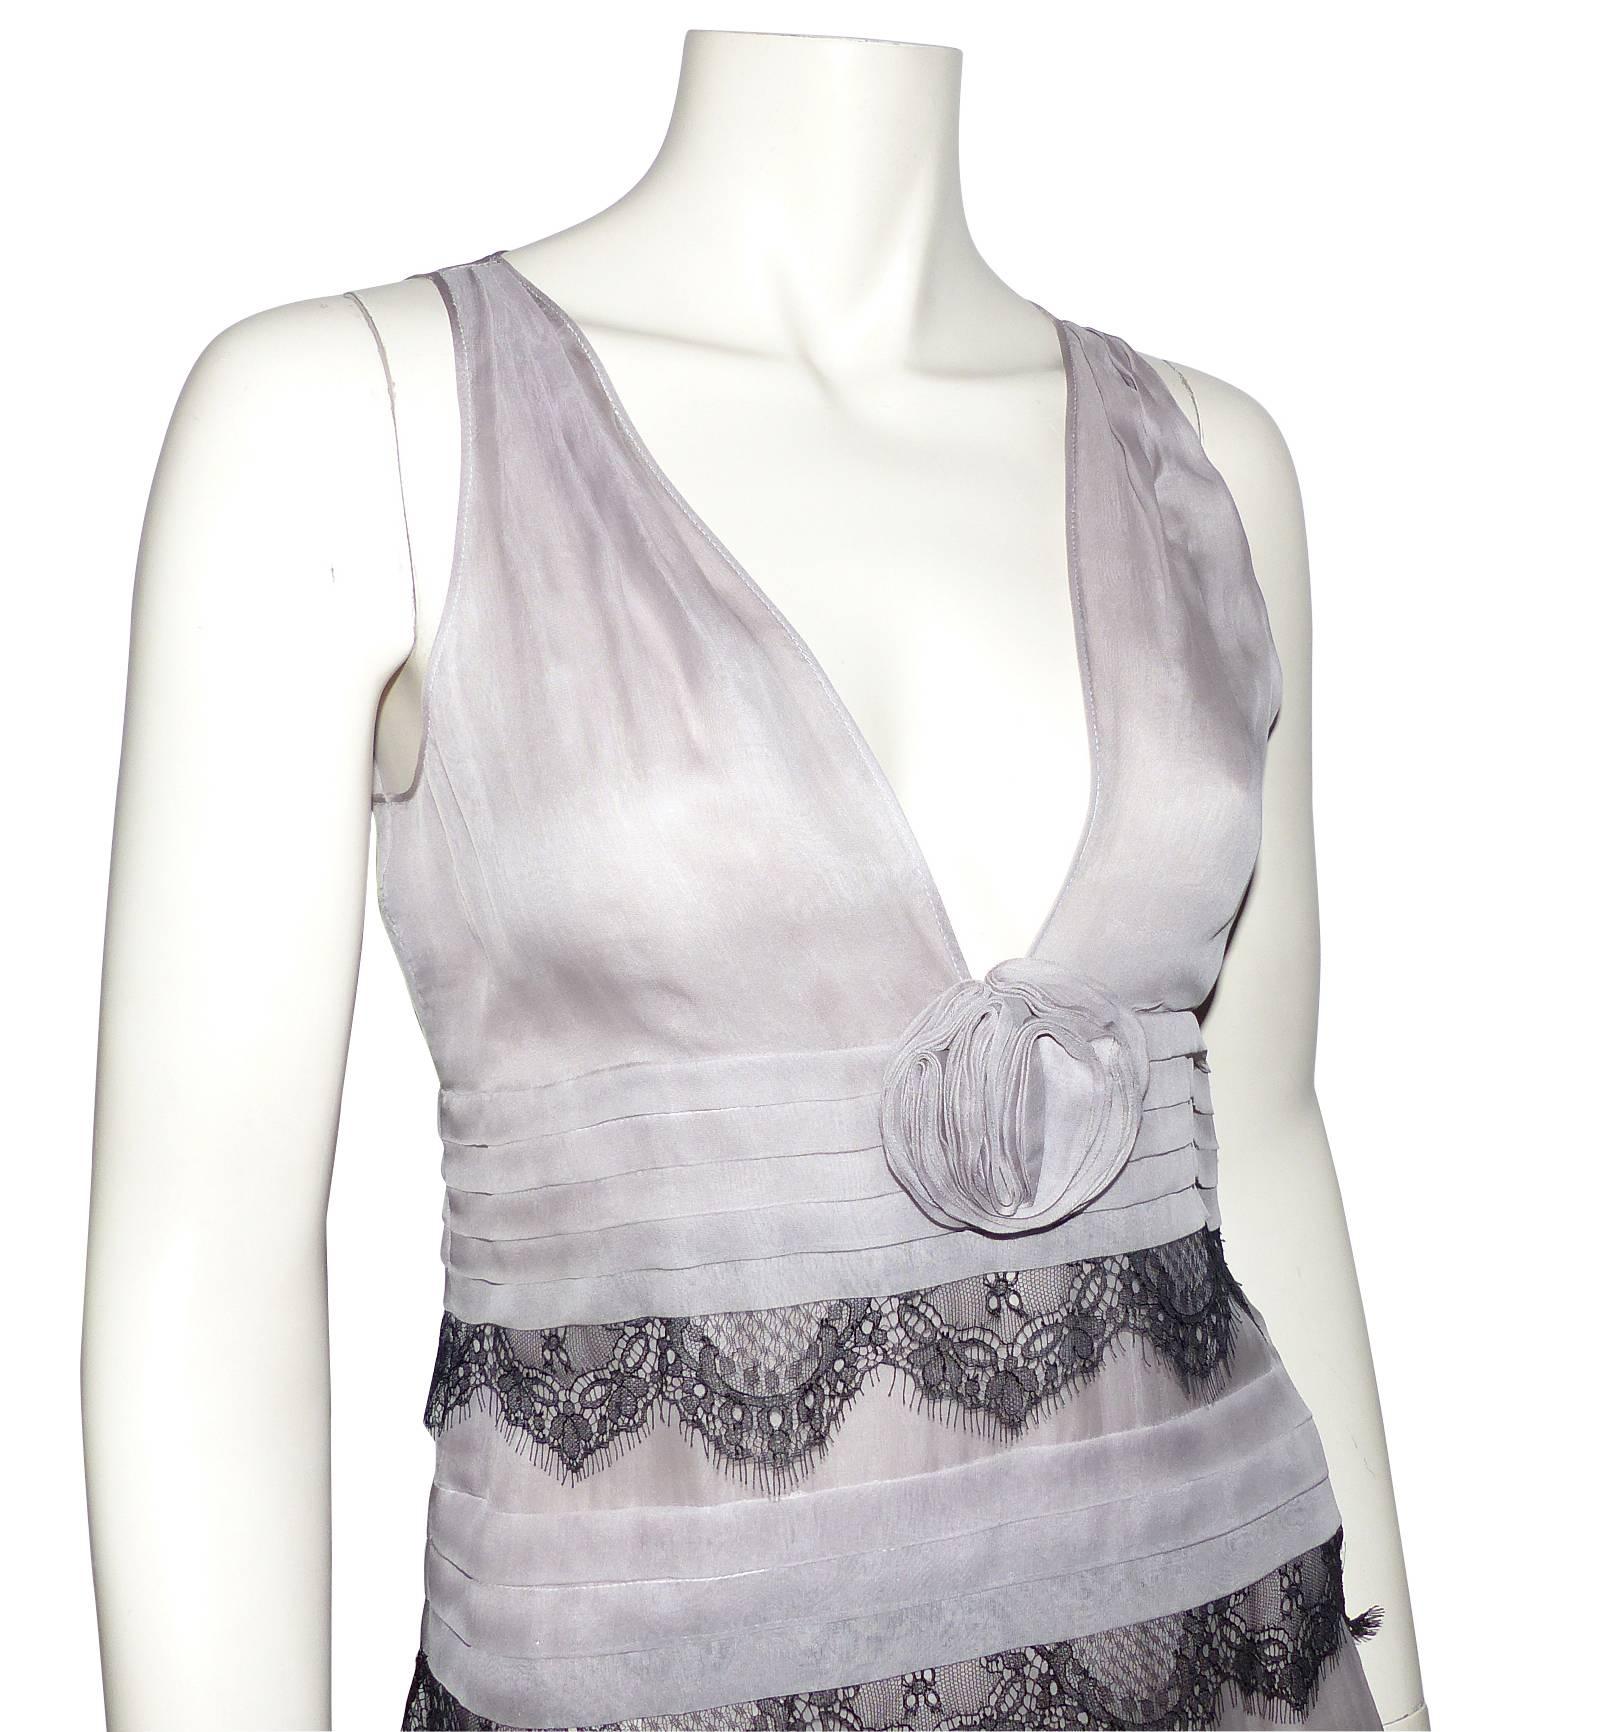 EFFET HAUTE COUTURE  Valentino Grey Silk Dress and  Black Lace  / SUBLIME  3